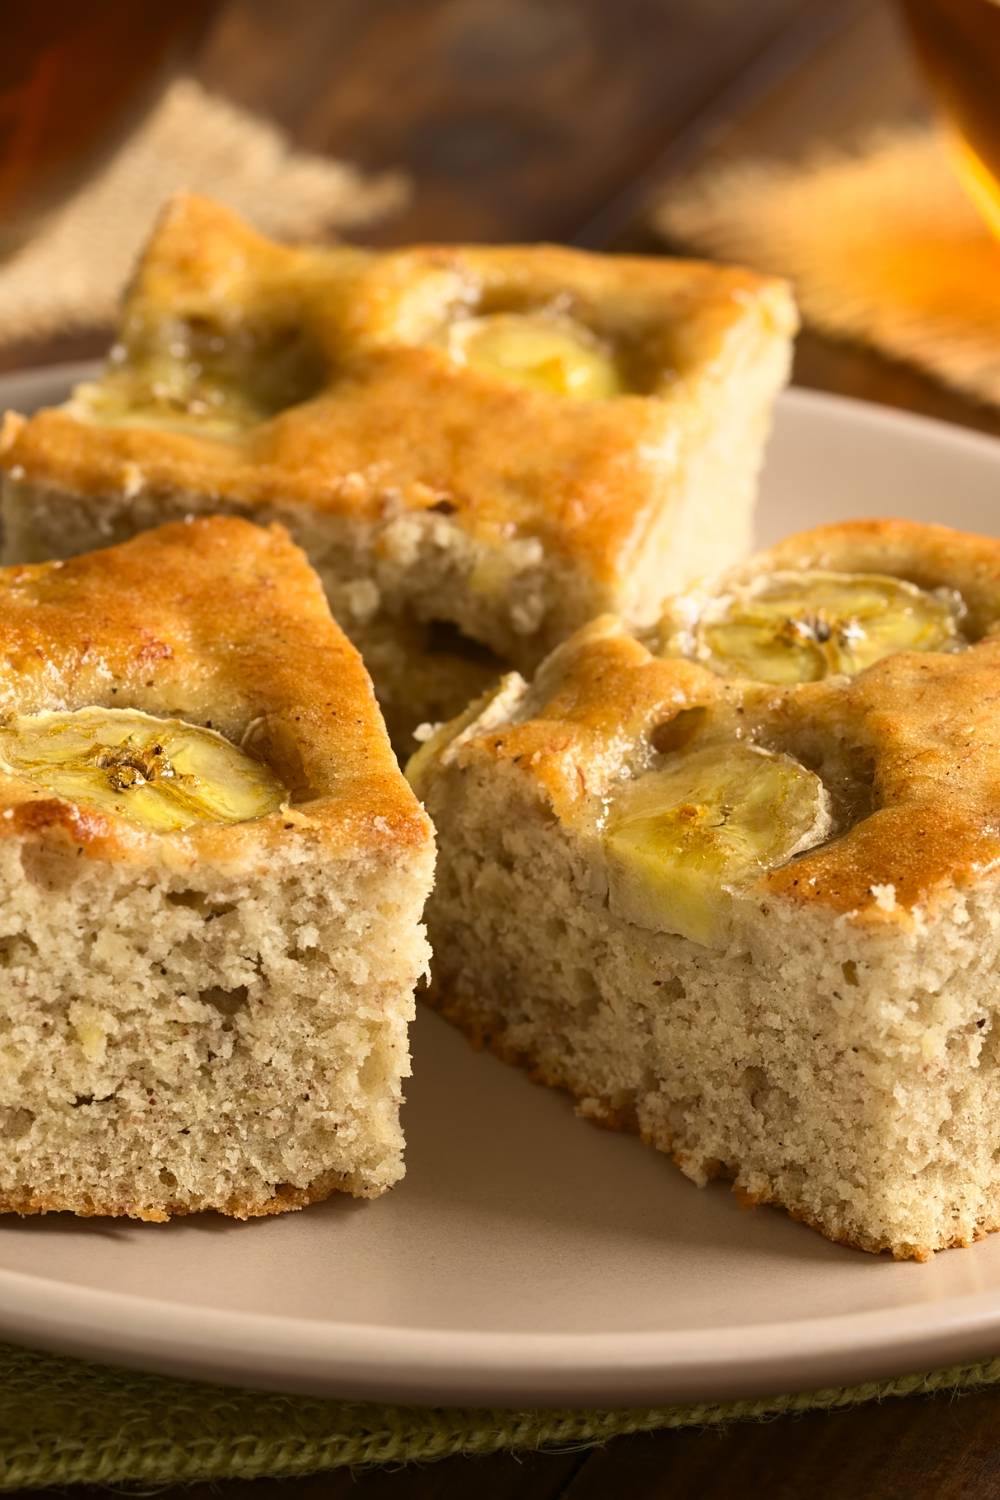 Slices of banana cake on a plate.